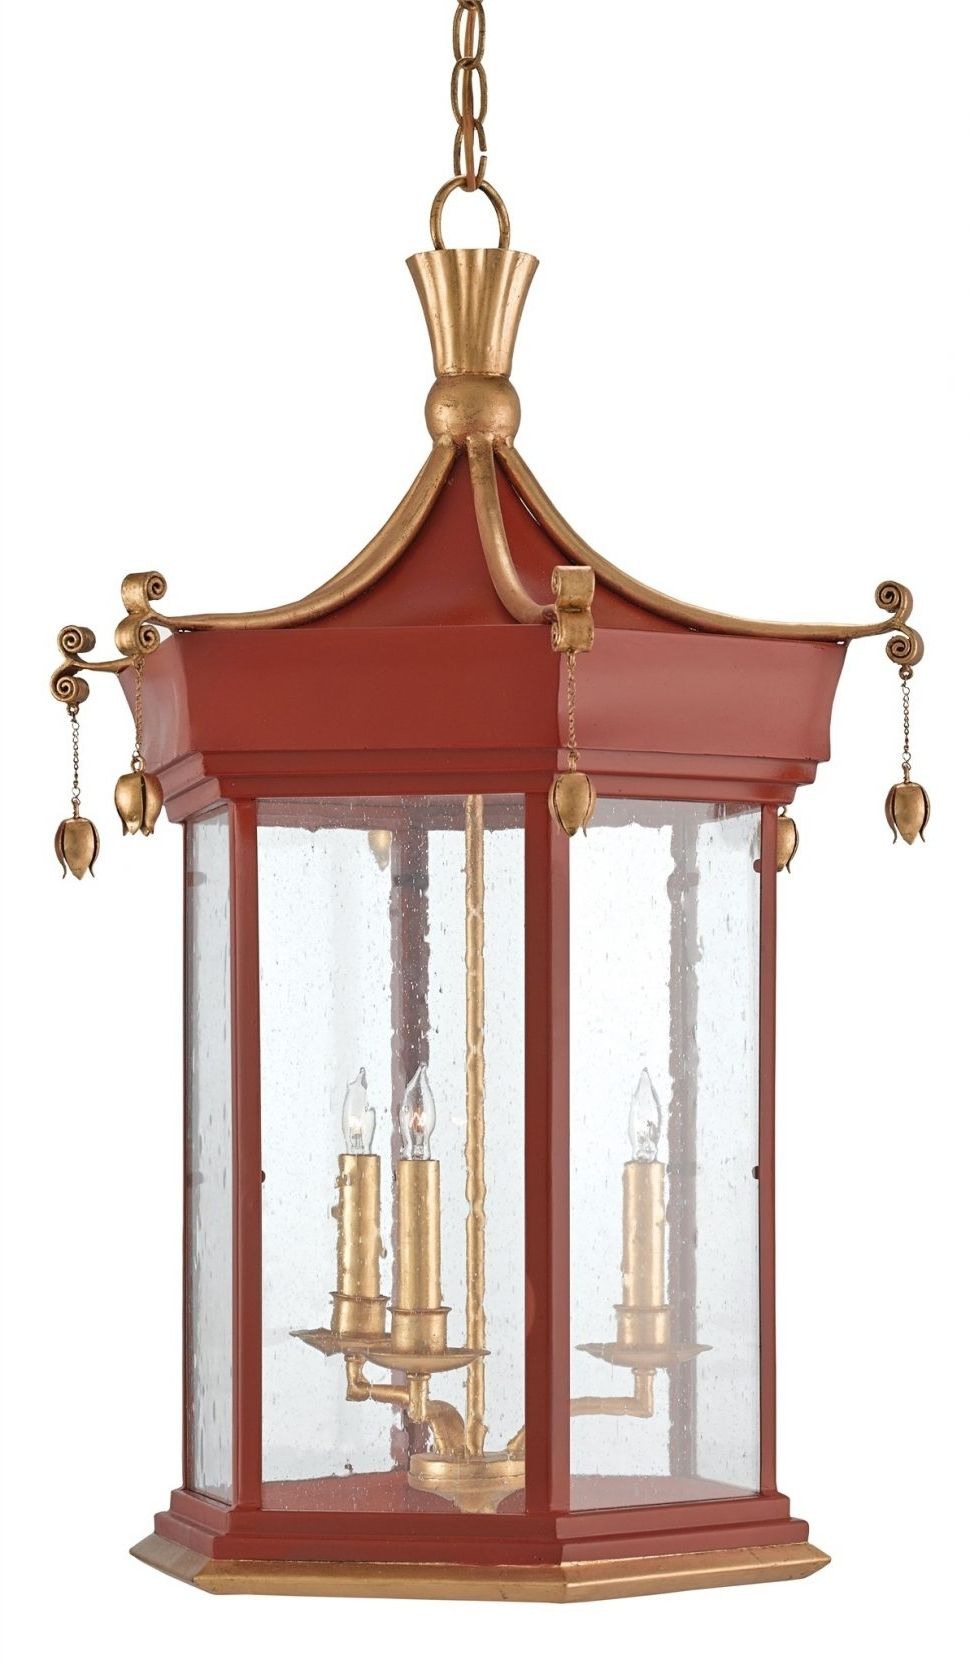 Latest Chandeliers Design : Marvelous Fnl Pago Lantern Chandelier For Chinoiserie Chandeliers (View 1 of 20)